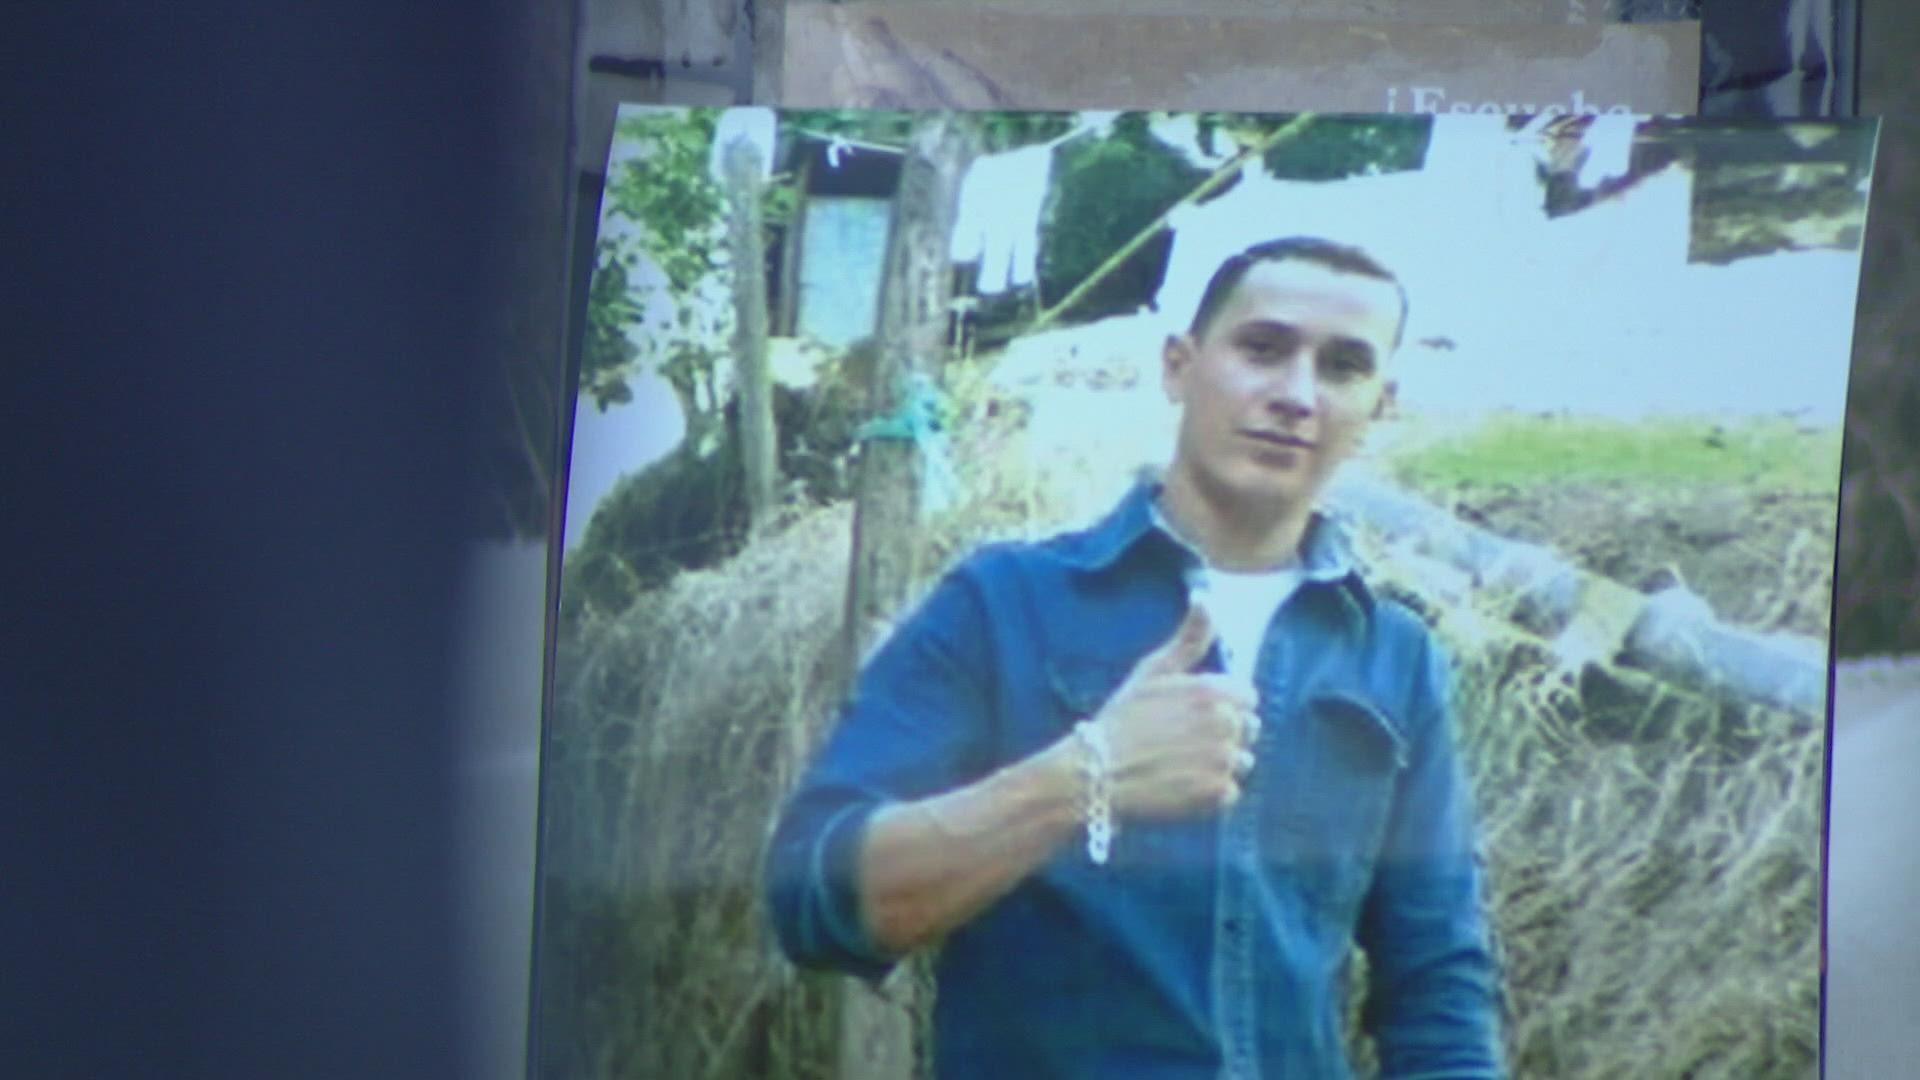 Melvin Calero Mendoza collapsed in the Aurora facility's kitchen and died last summer.